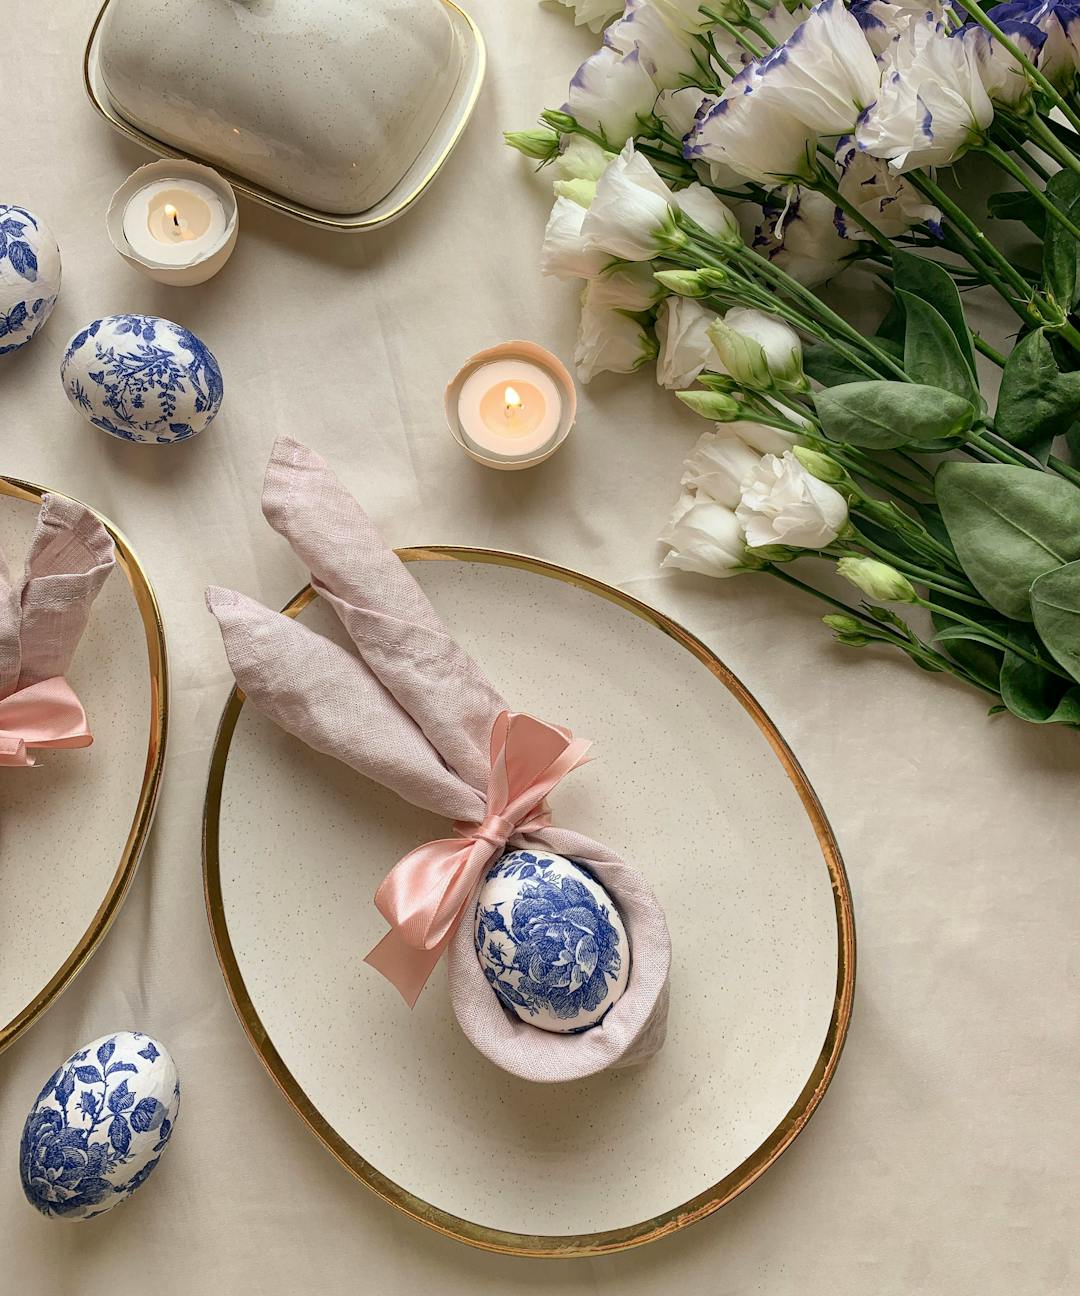 Easter Home Decor That Won’t Make Your Space Feel Cheesy